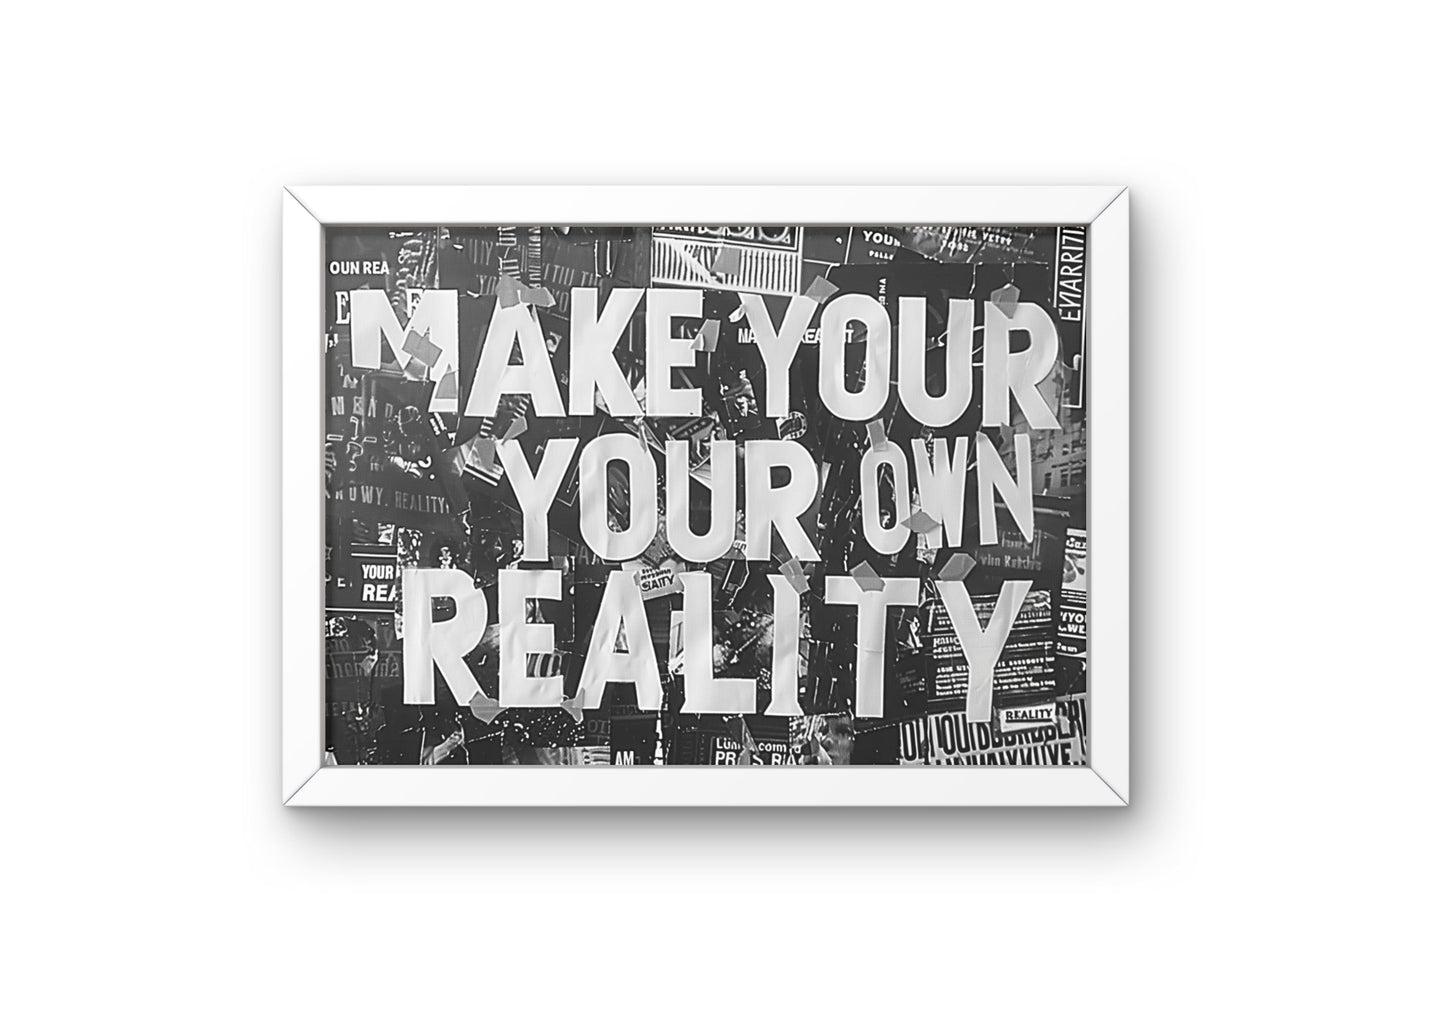 Make Your Own Reality